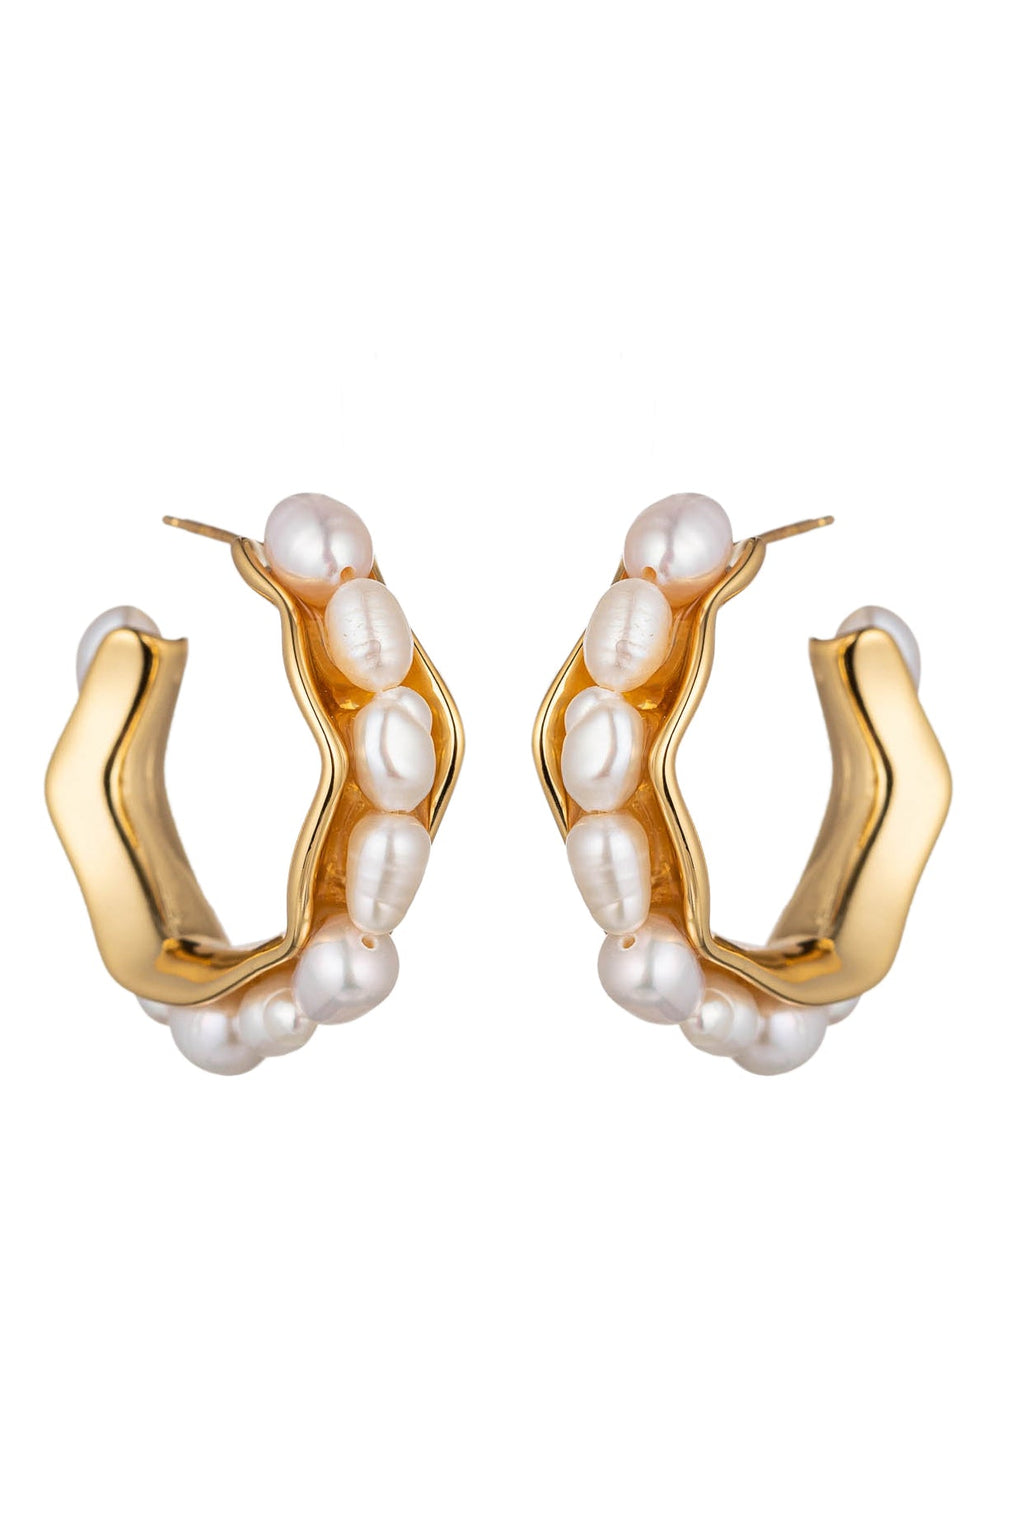 Isabella 18K Gold-Plated Earrings: Elegance in Every Glint.